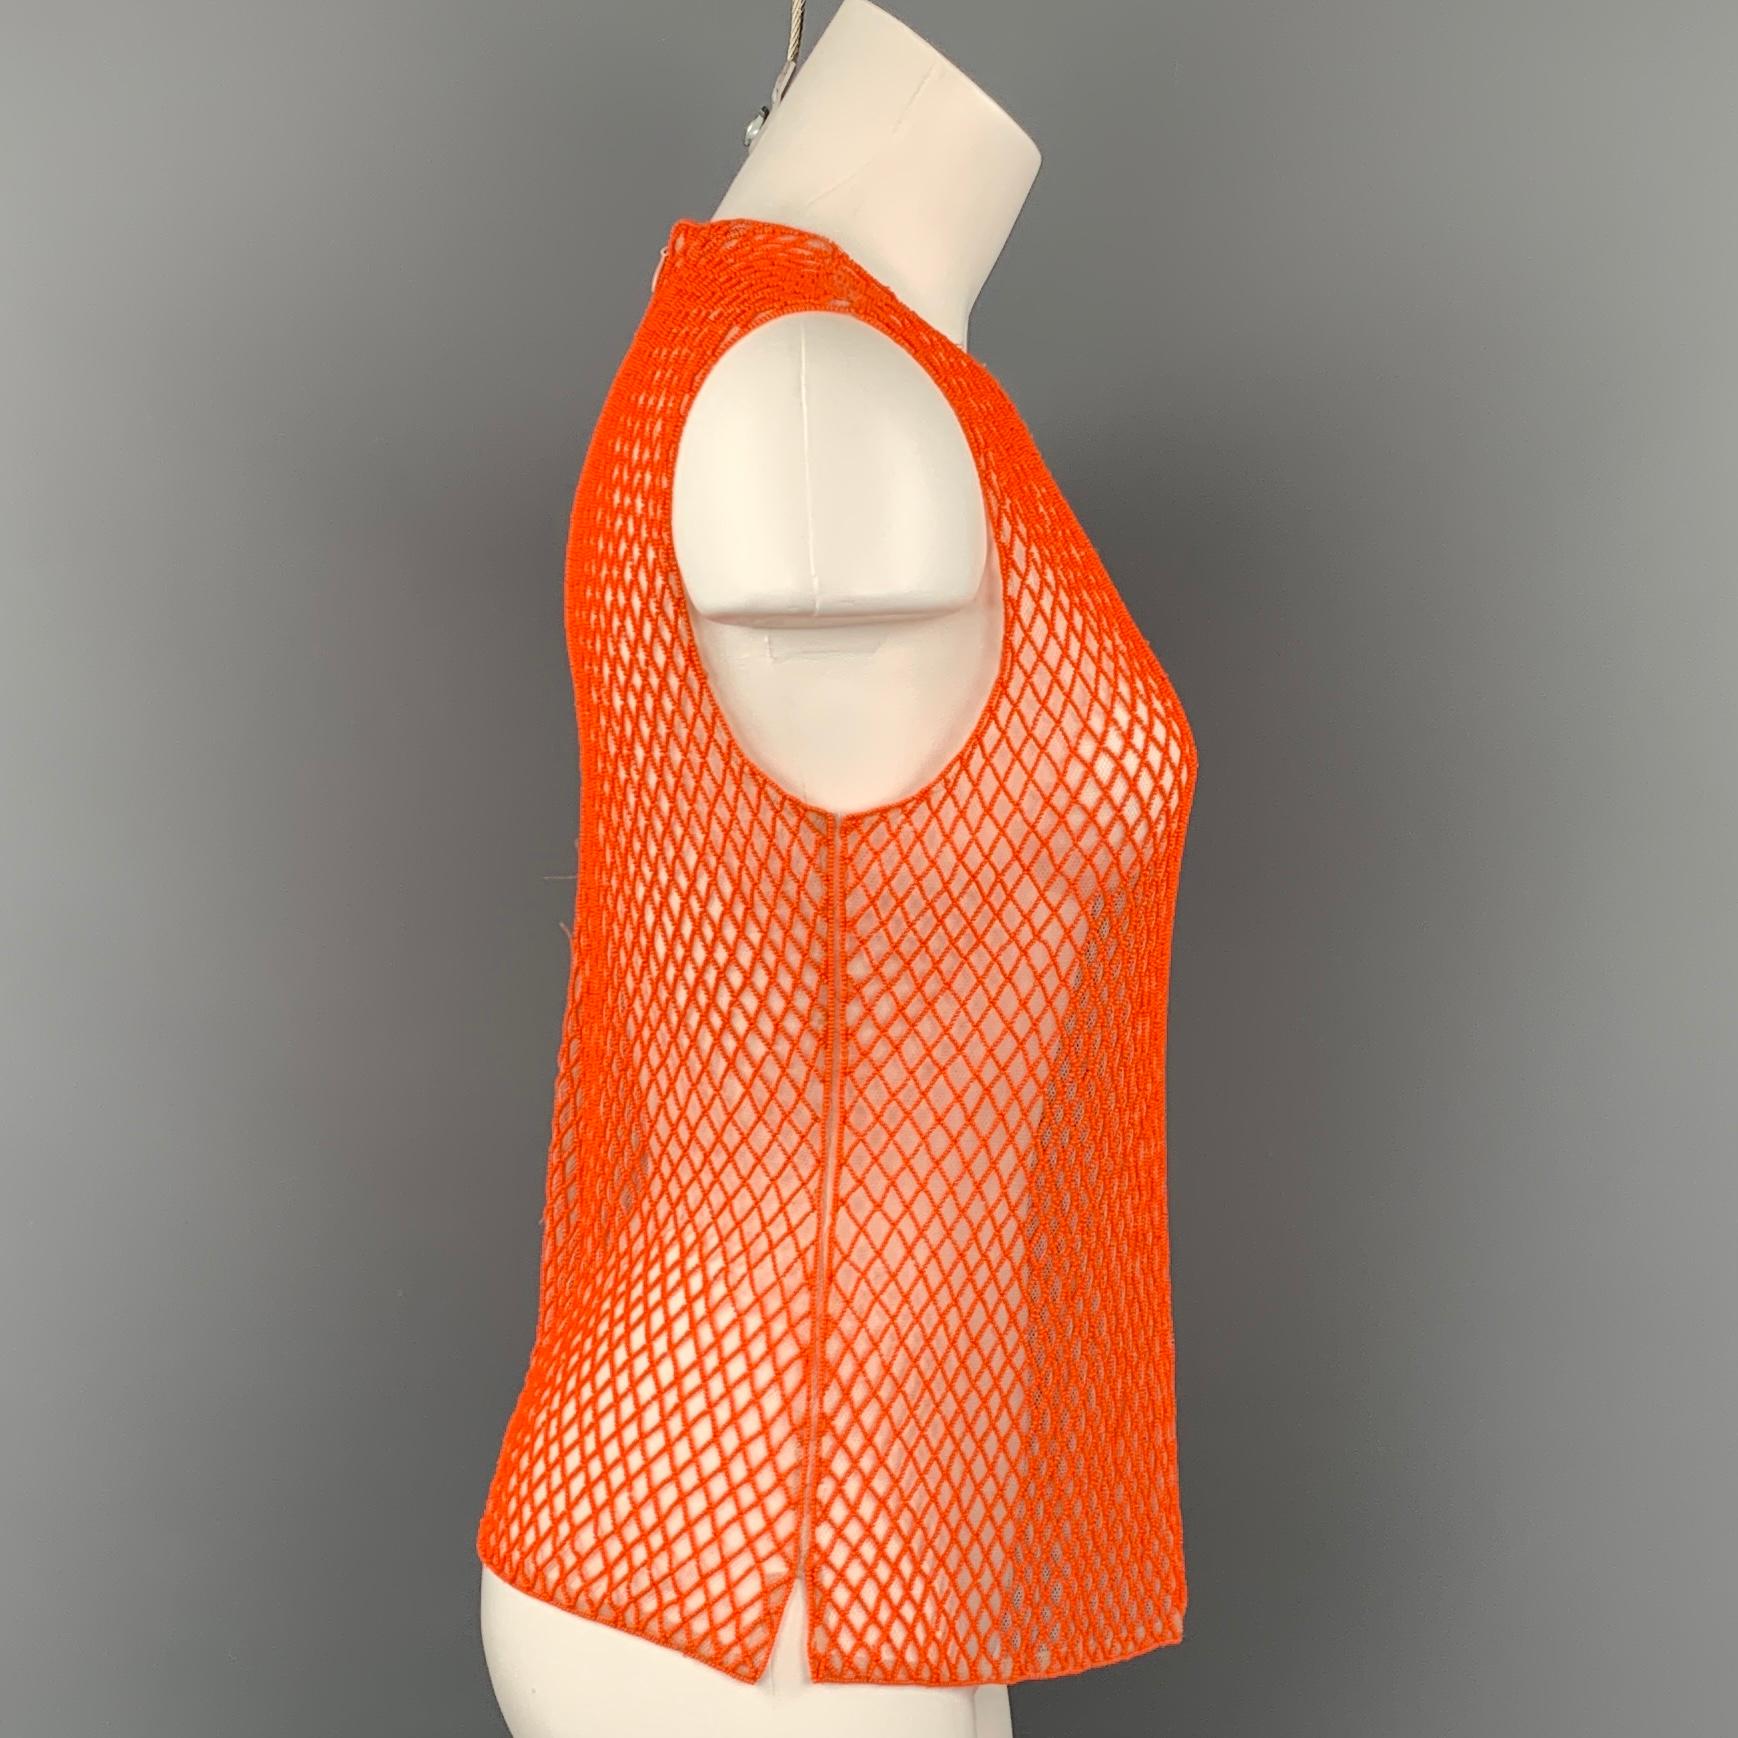 DRIES VAN NOTEN dress top comes in a orange & nude polyester with a beaded mesh design featuring a crew-neck, sleeveless, and a back zip up closure. 

Very Good Pre-Owned Condition.
Marked: 36

Measurements:

Shoulder: 15.5 in.
Bust: 31 in.
Length: